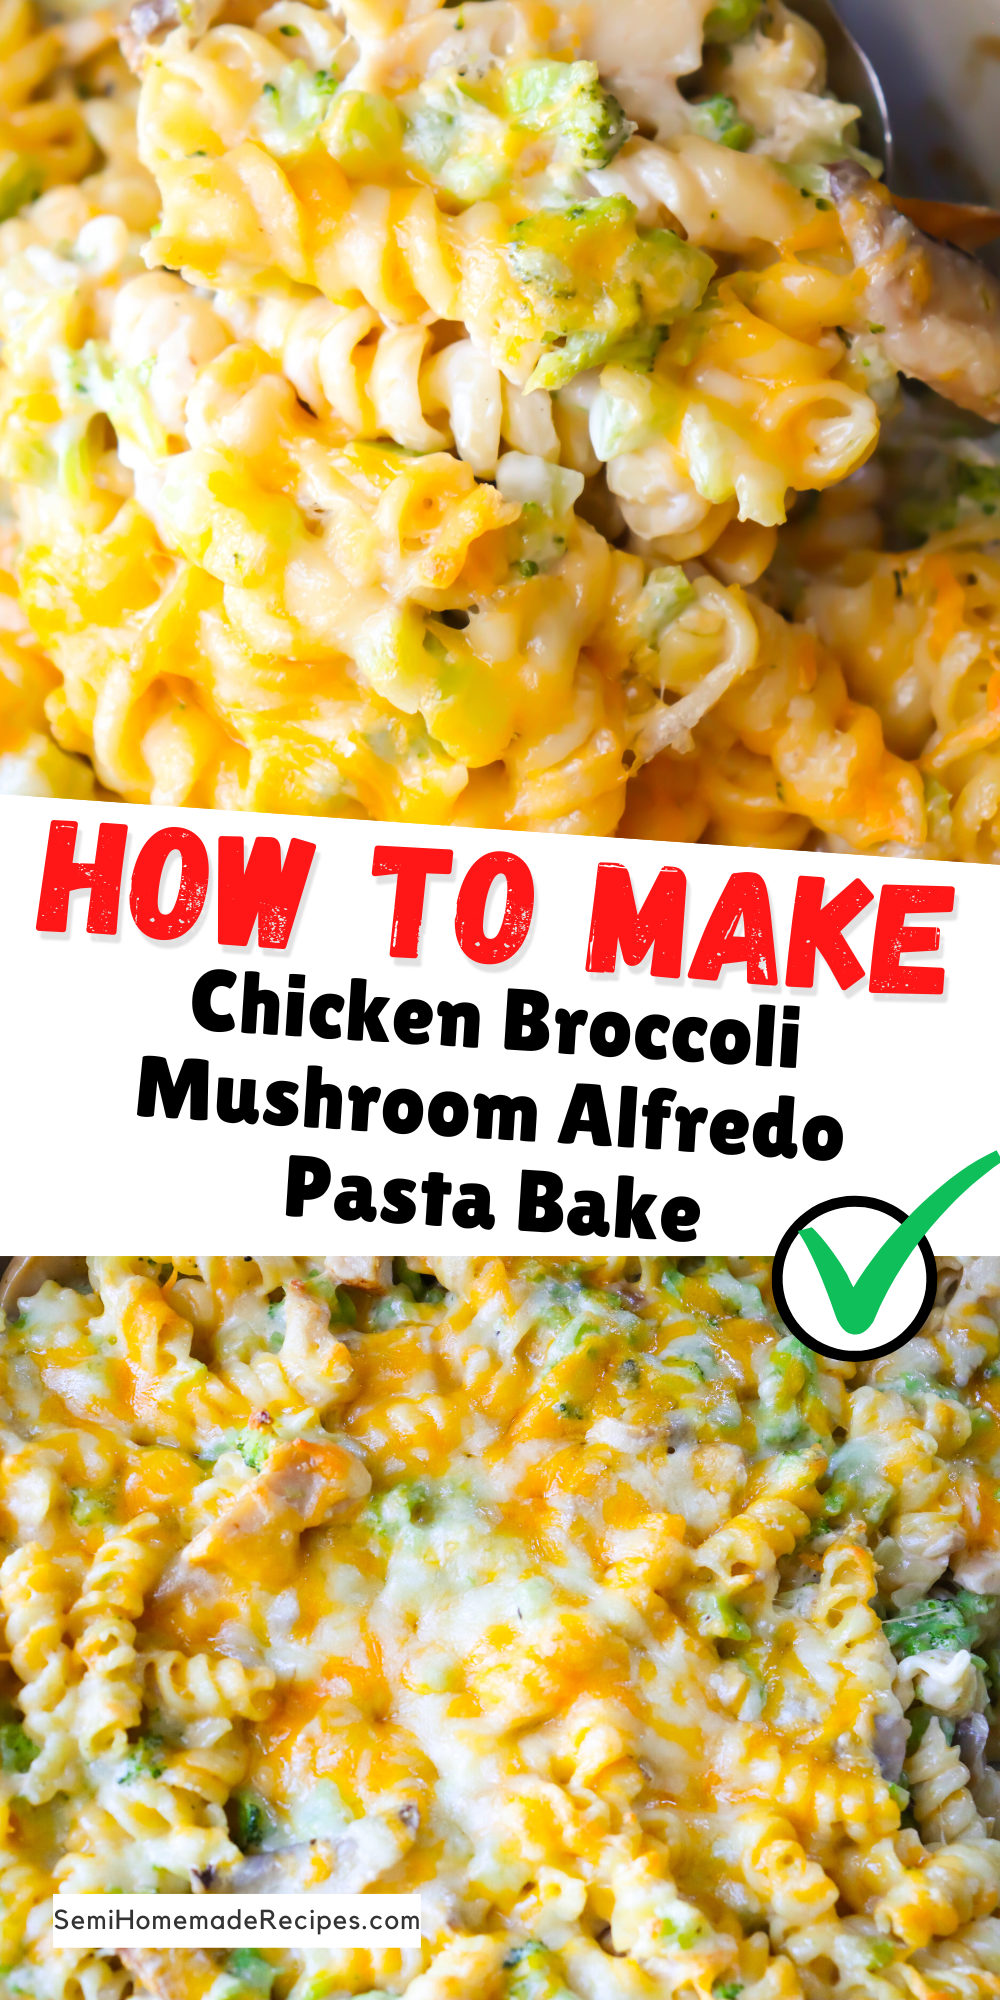 Chicken Broccoli Mushroom Alfredo Pasta Bake is a super simple semihomemade chicken alfredo casserole that is perfect for a busy weeknight! Lets get dinner on the table quickly so we can spend more time with our family! 